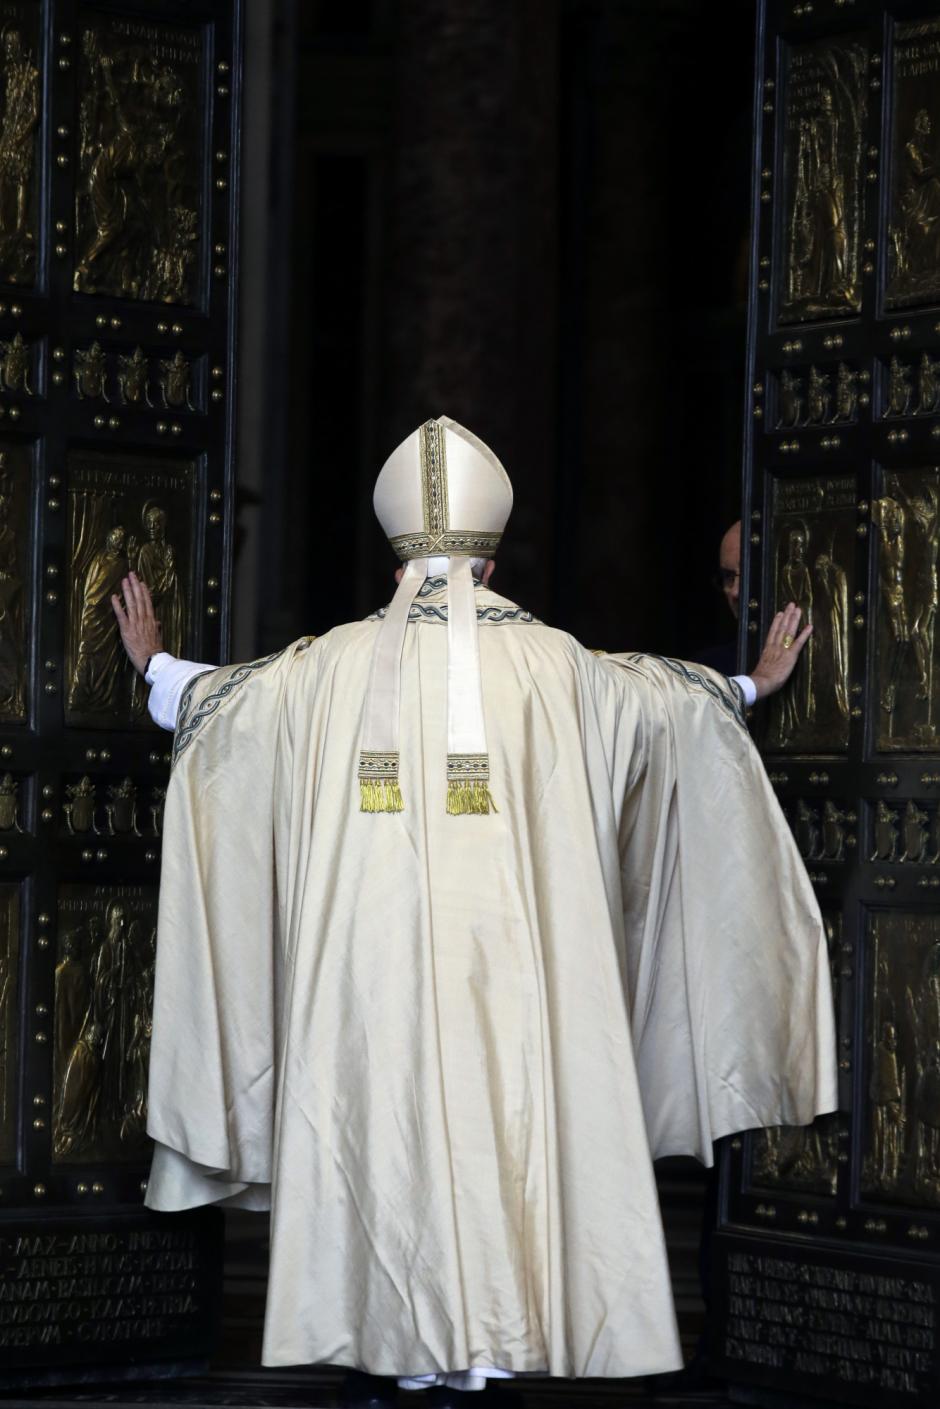 Pope Francis during a Mass prior to the opening of the Holy Door of St. Peter's Basilica, formally starting the Holy Year of Mercy, in St. Peter's Square, at the Vatican, Tuesday, Dec. 8, 2015.
en la foto, de espaldas